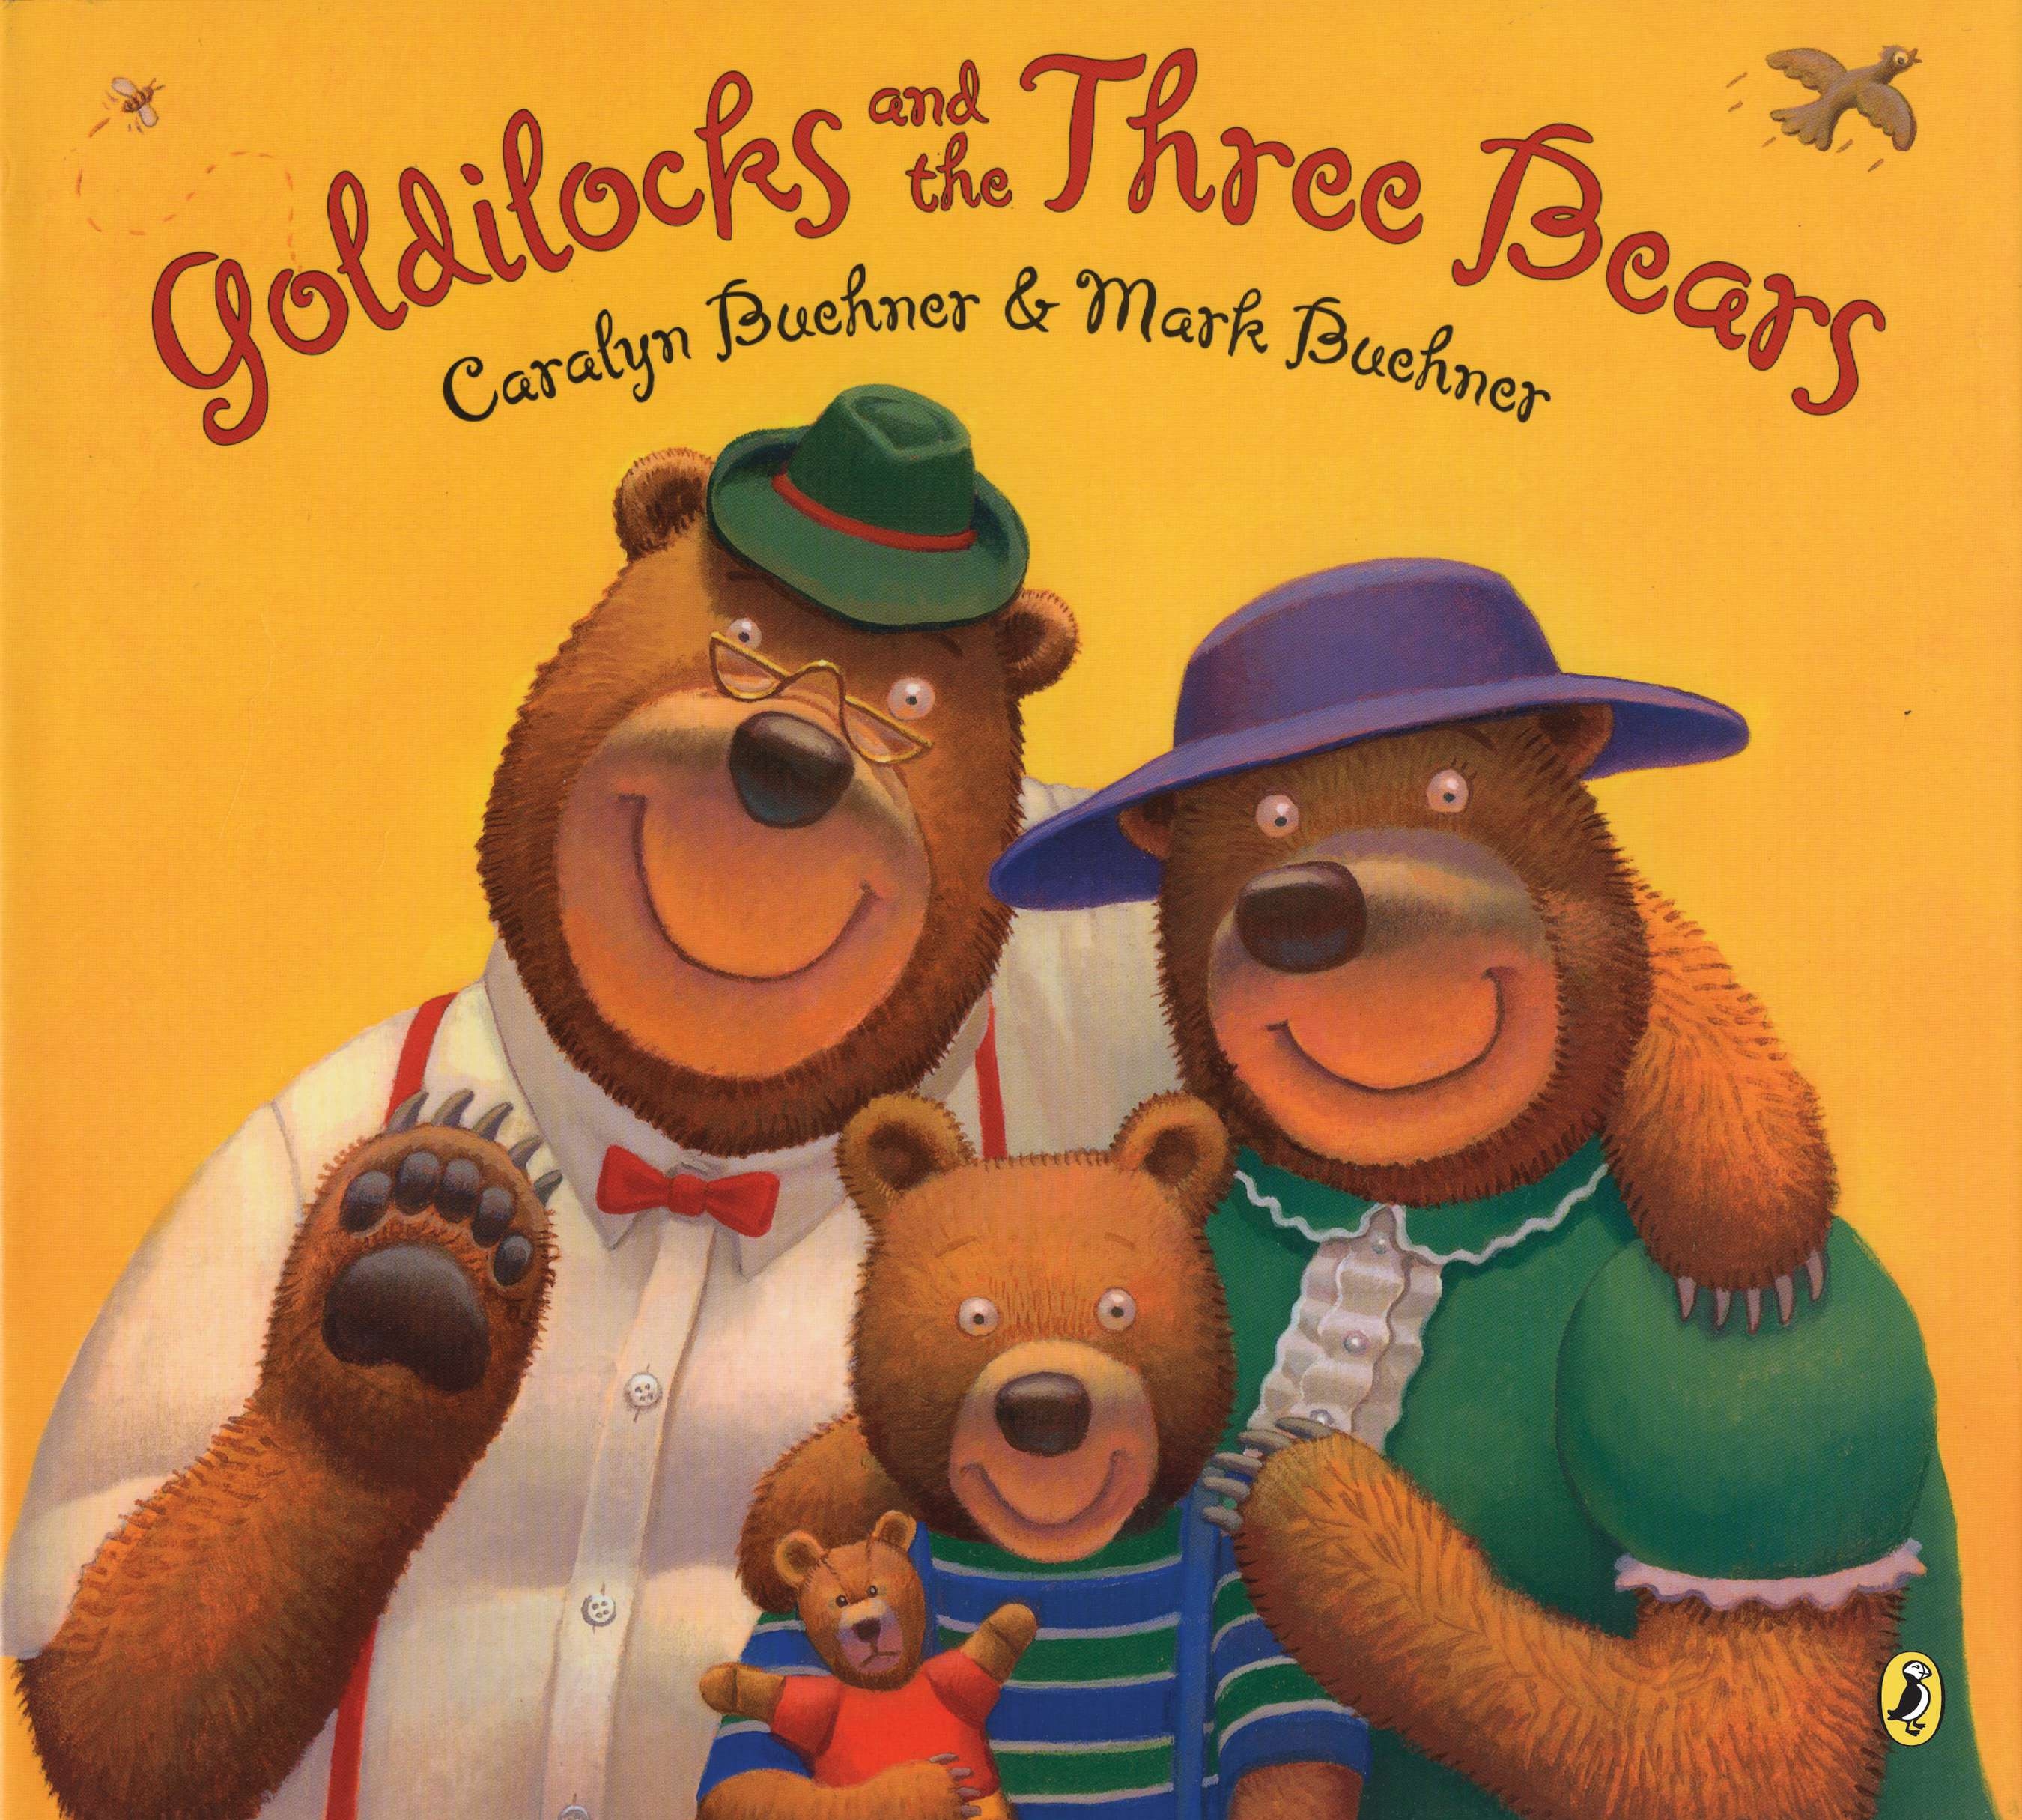 book review of goldilocks and the three bears